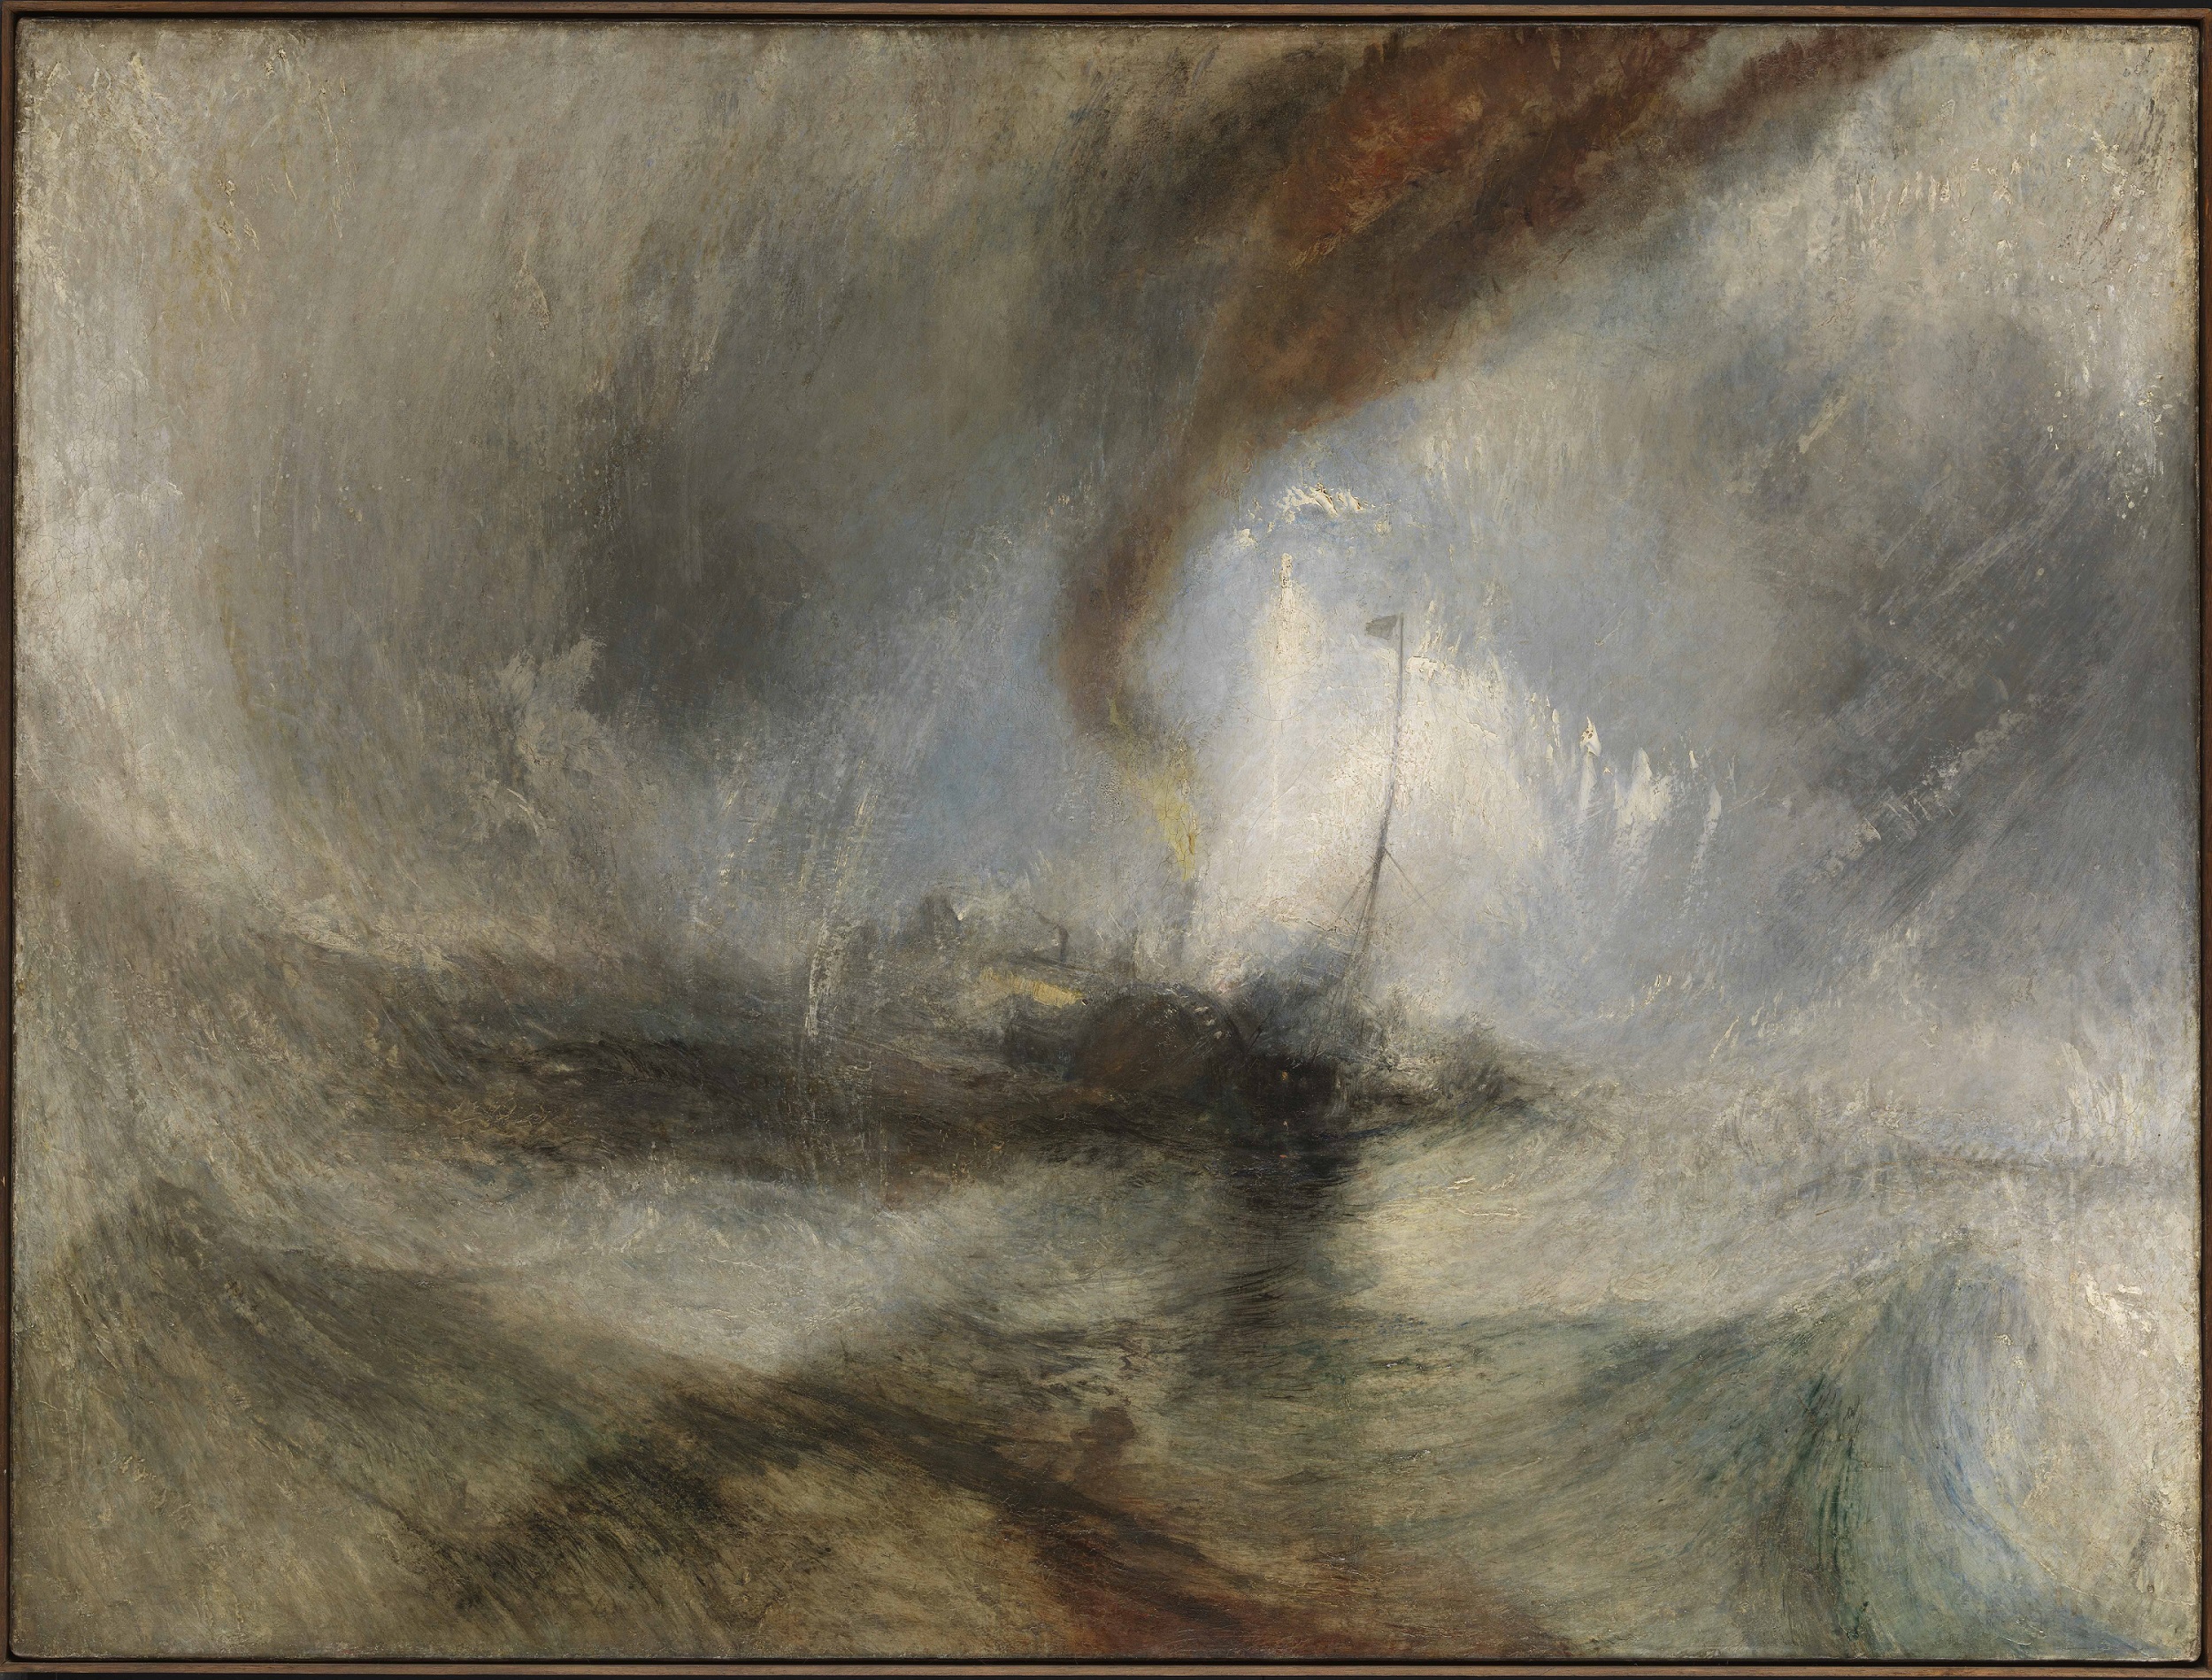 Turner, Snow Storm - Steam-Boat off a Harbour's Mouth, 1842, Tate